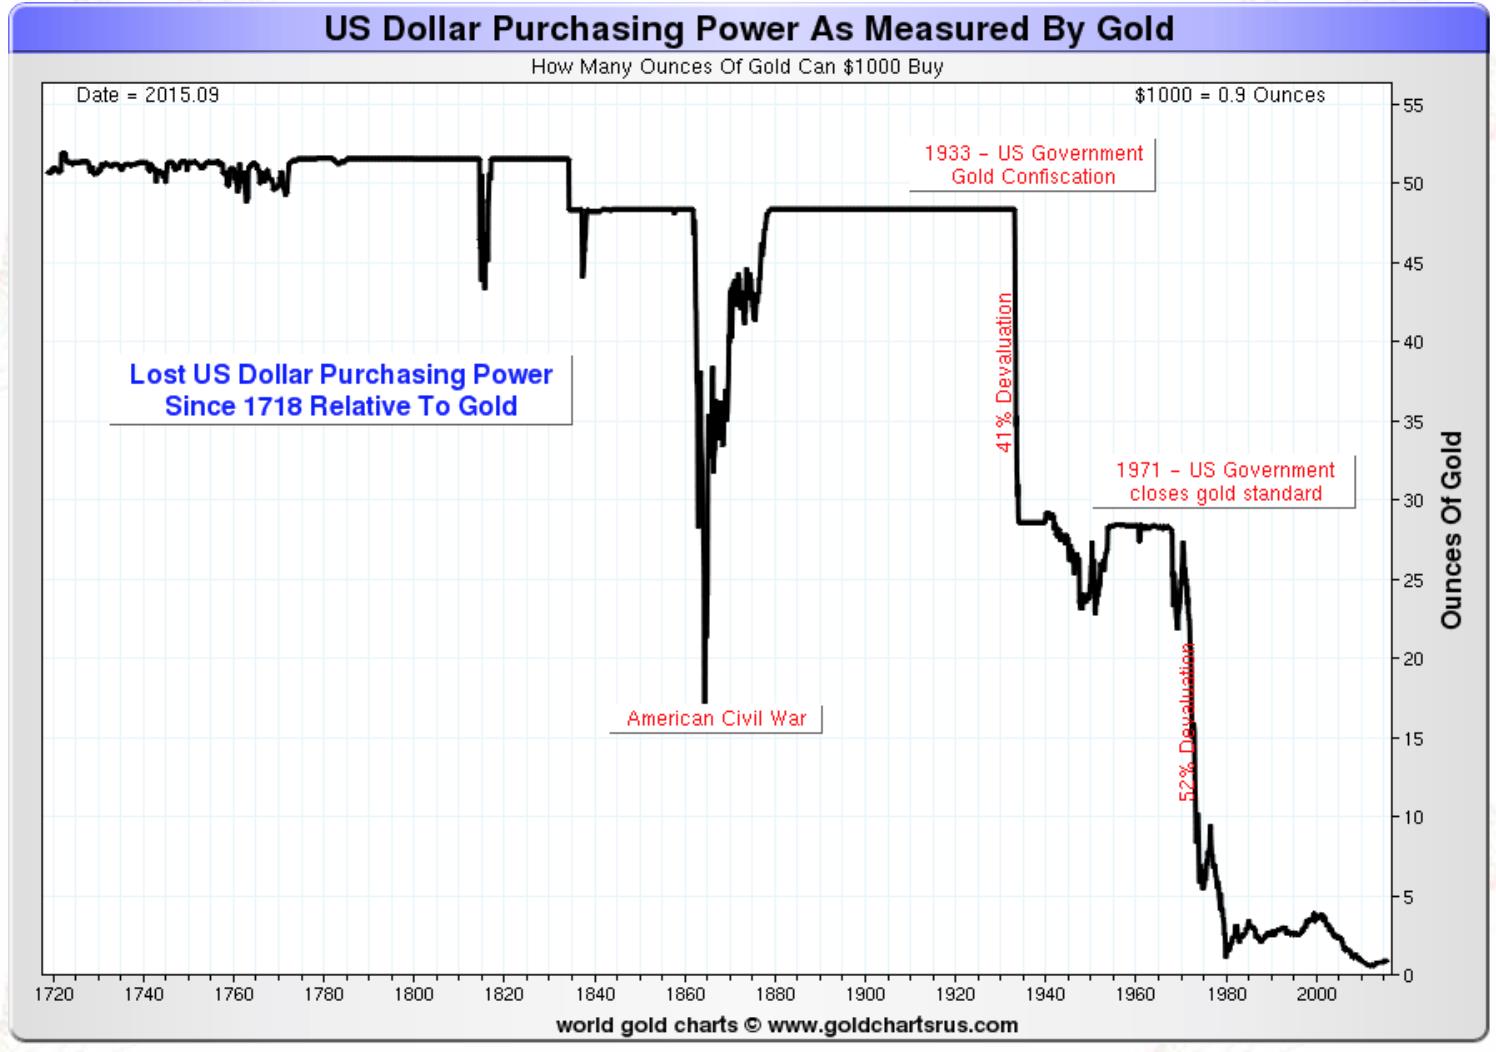 US Dollar Purchasing Power As Measured By Gold 